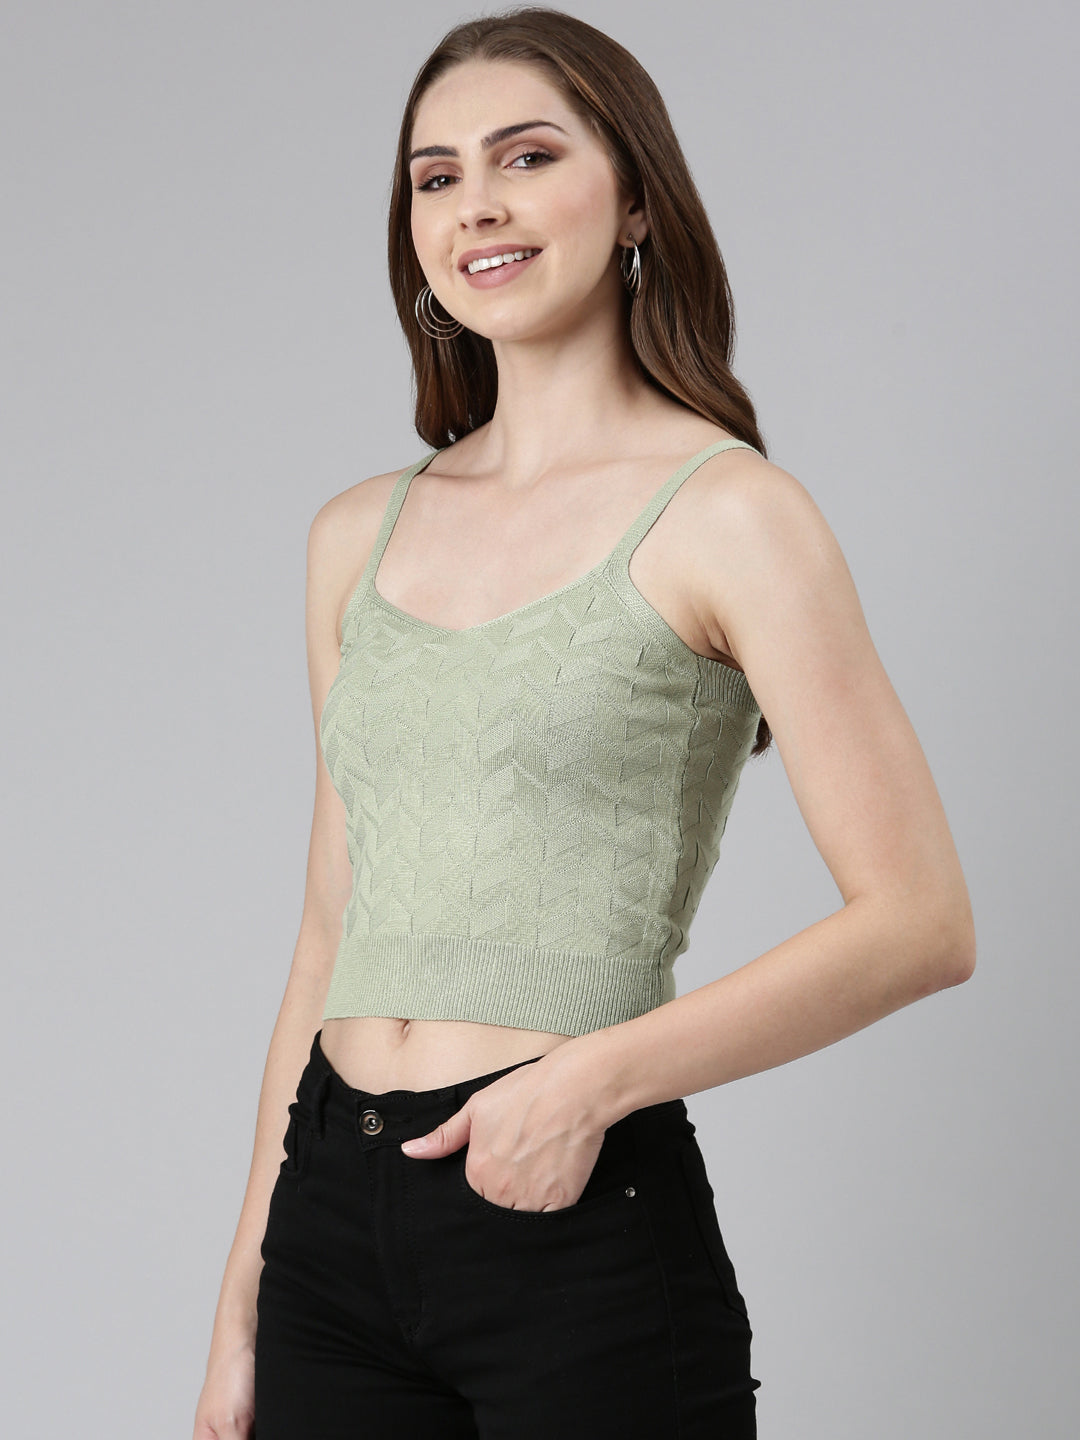 Shoulder Straps Solid Sleeveless Fitted Olive Crop Top